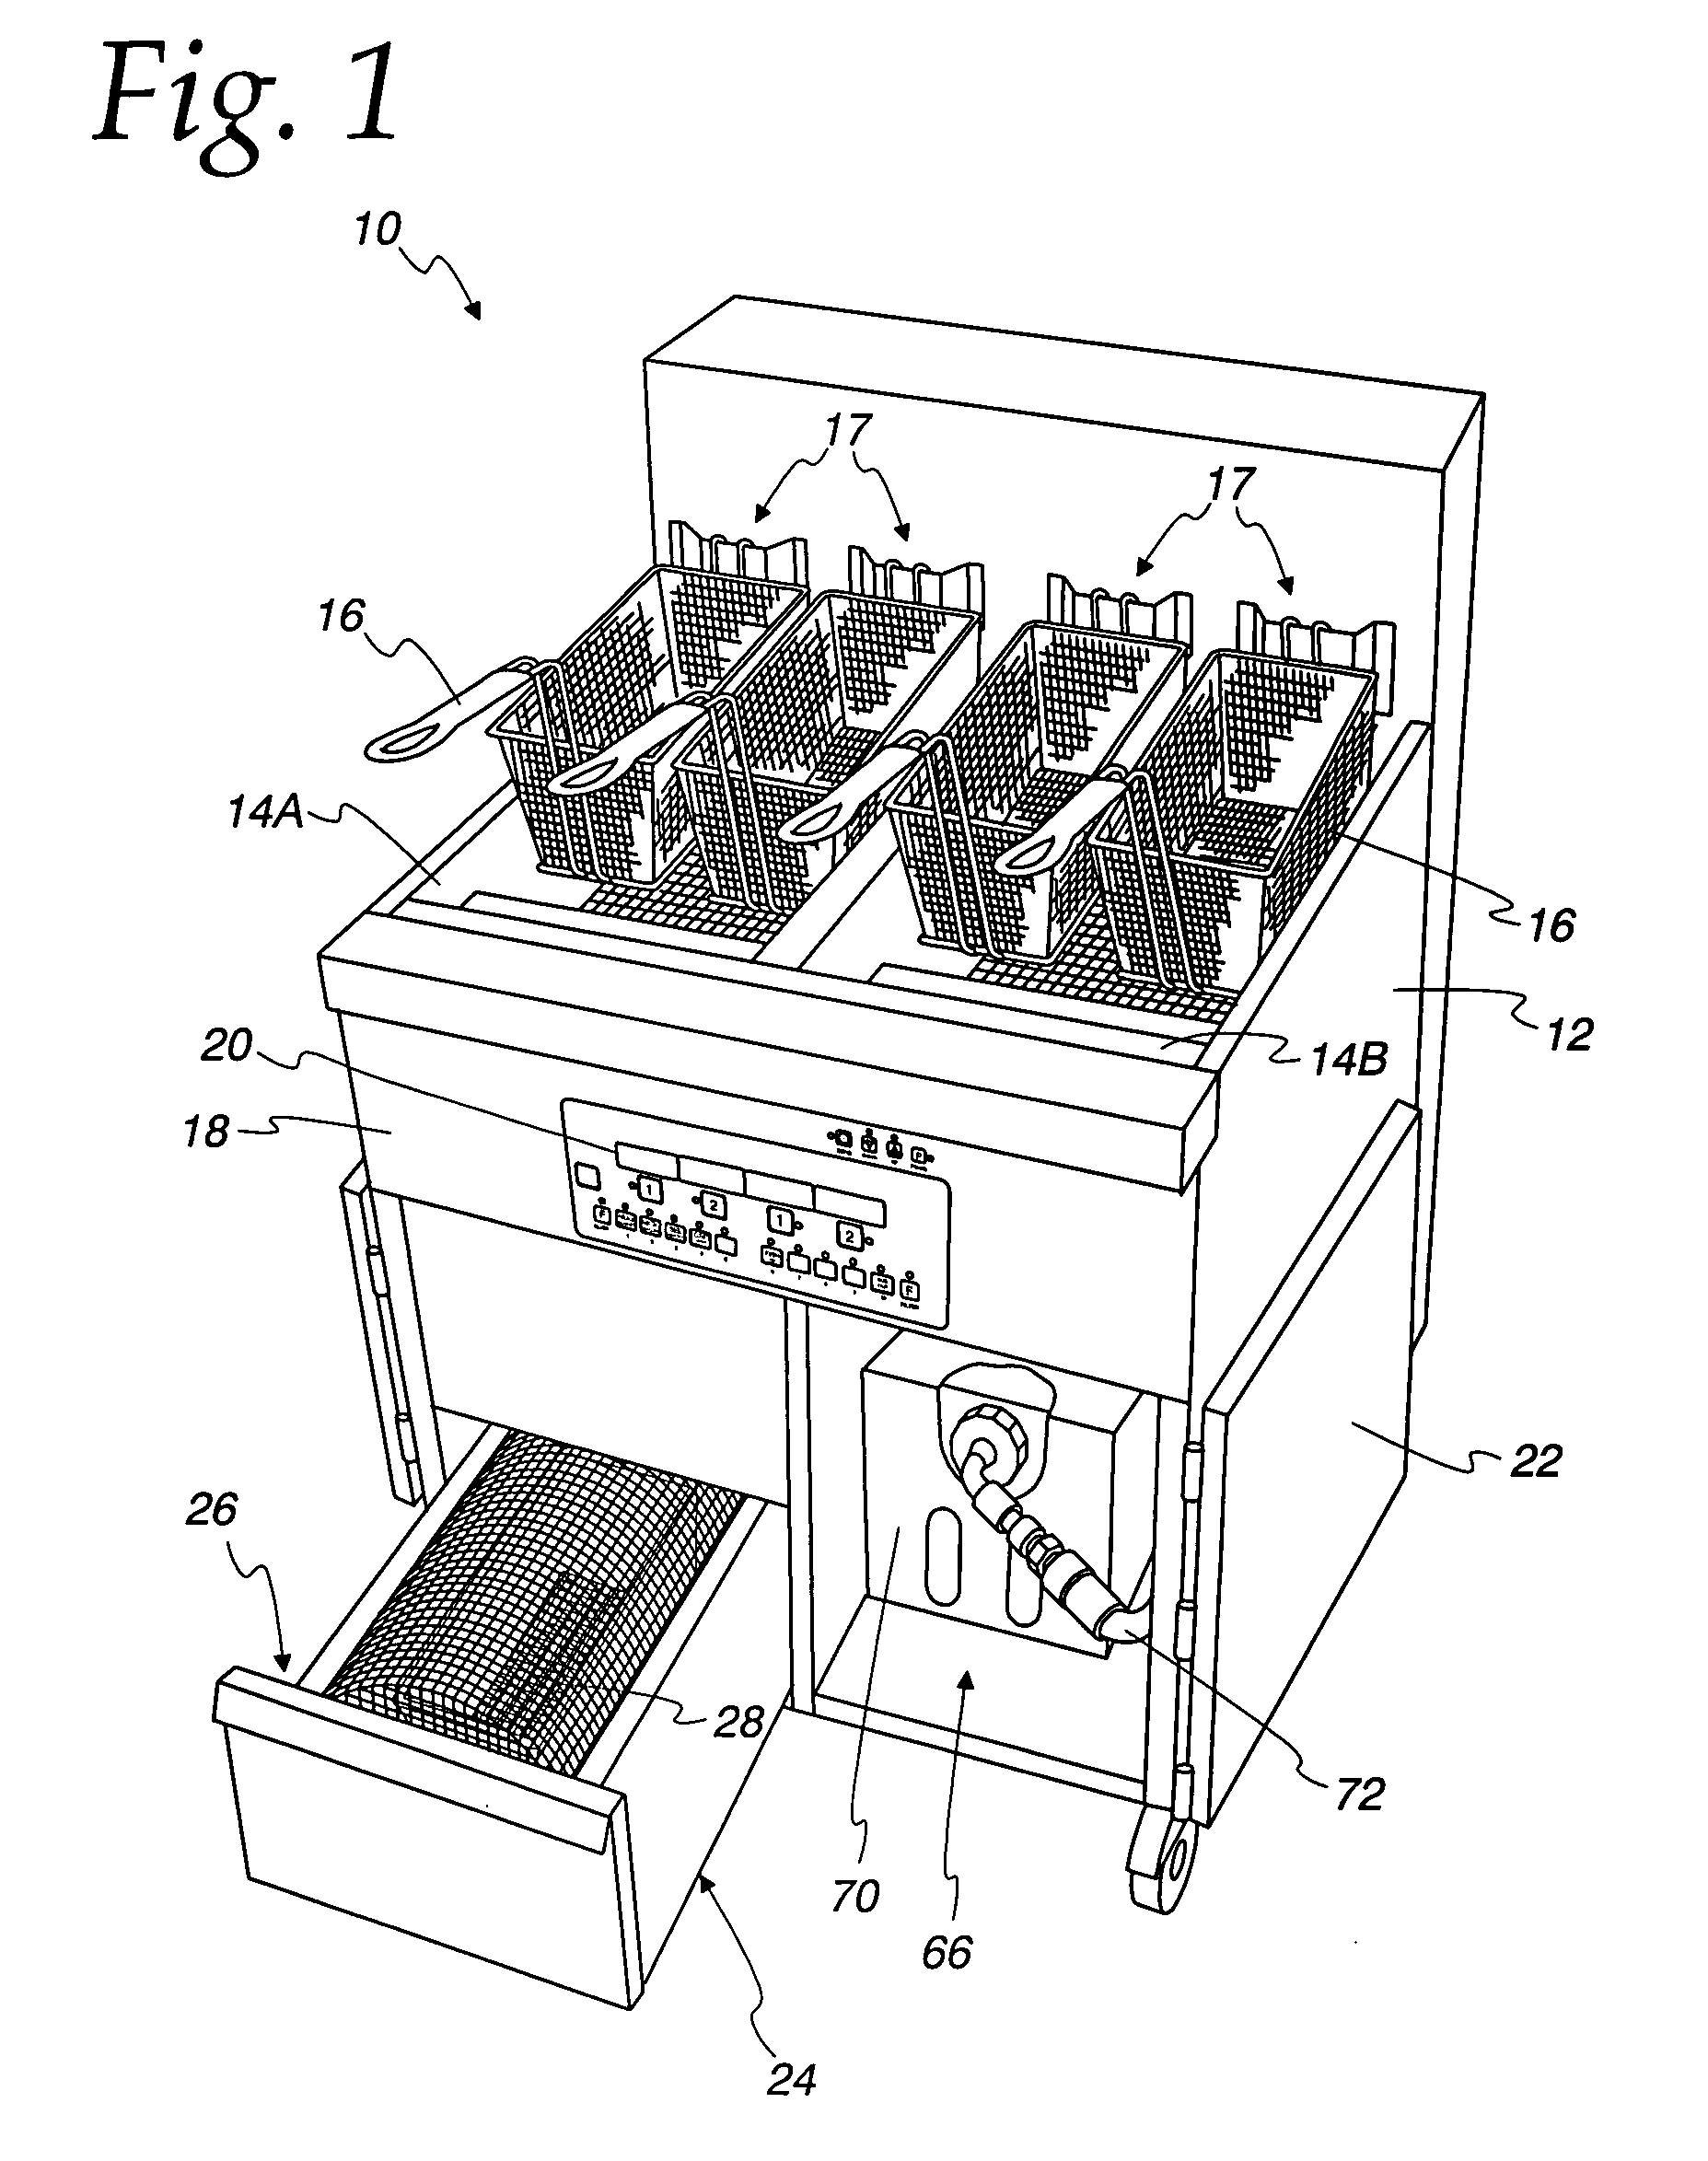 Low oil volume frying device and method